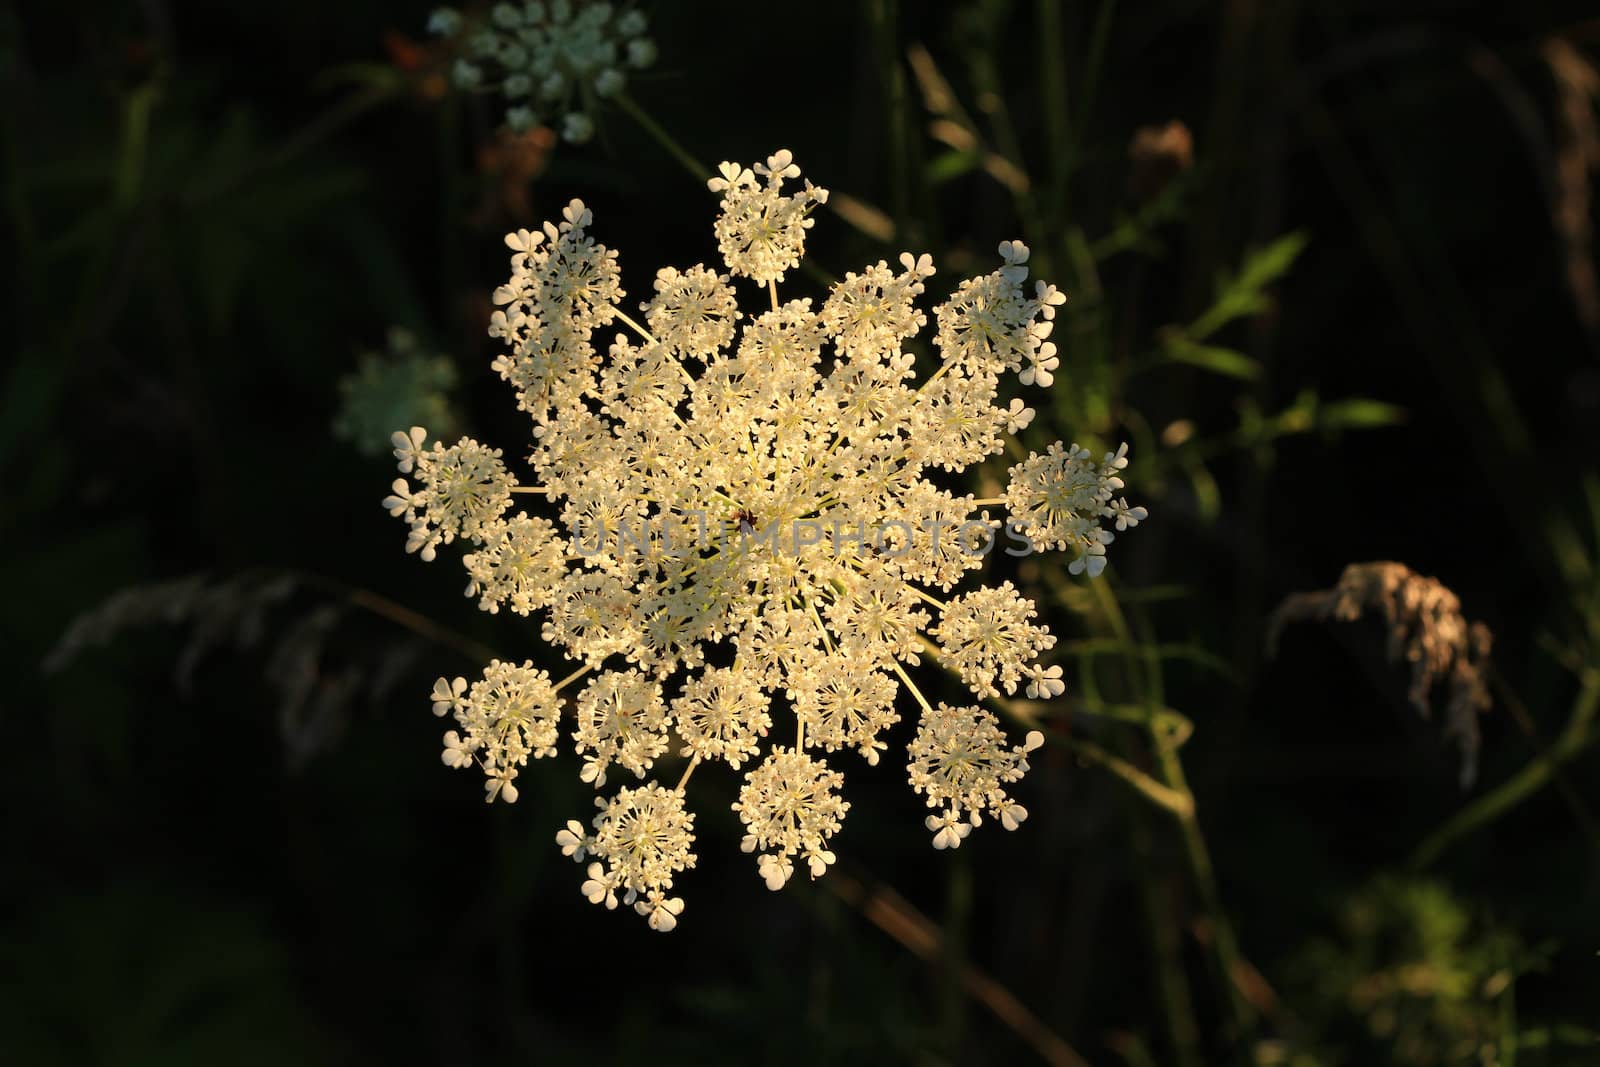 Queen Anne's Lace flower backlite by early morning sun